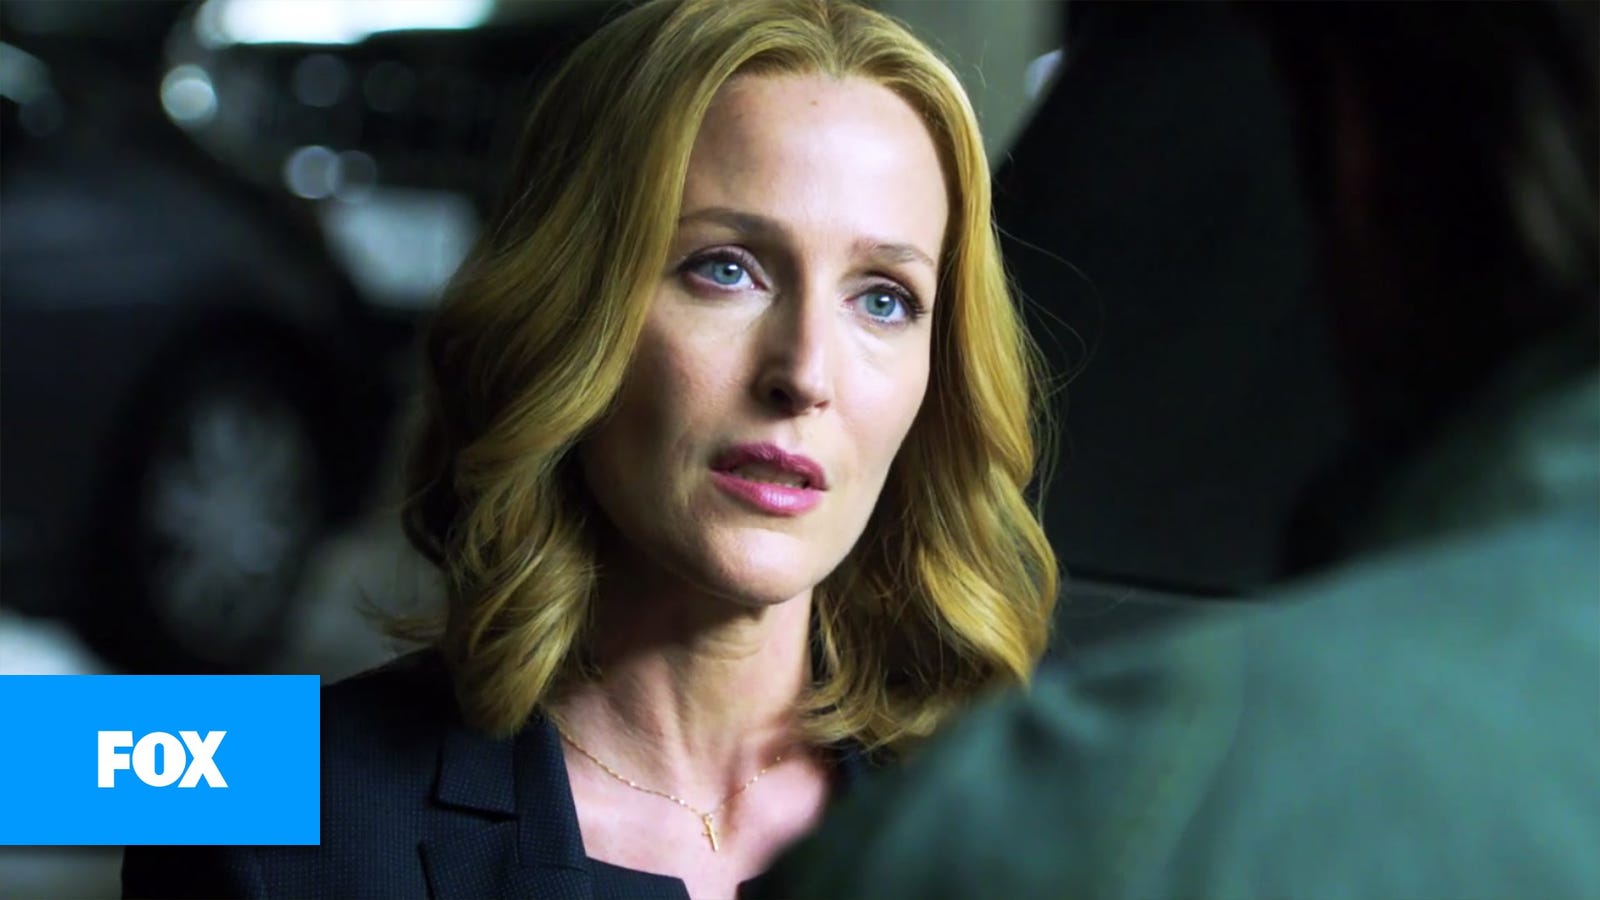 The Latest X-Files Teaser Asks If Scully Is Ready